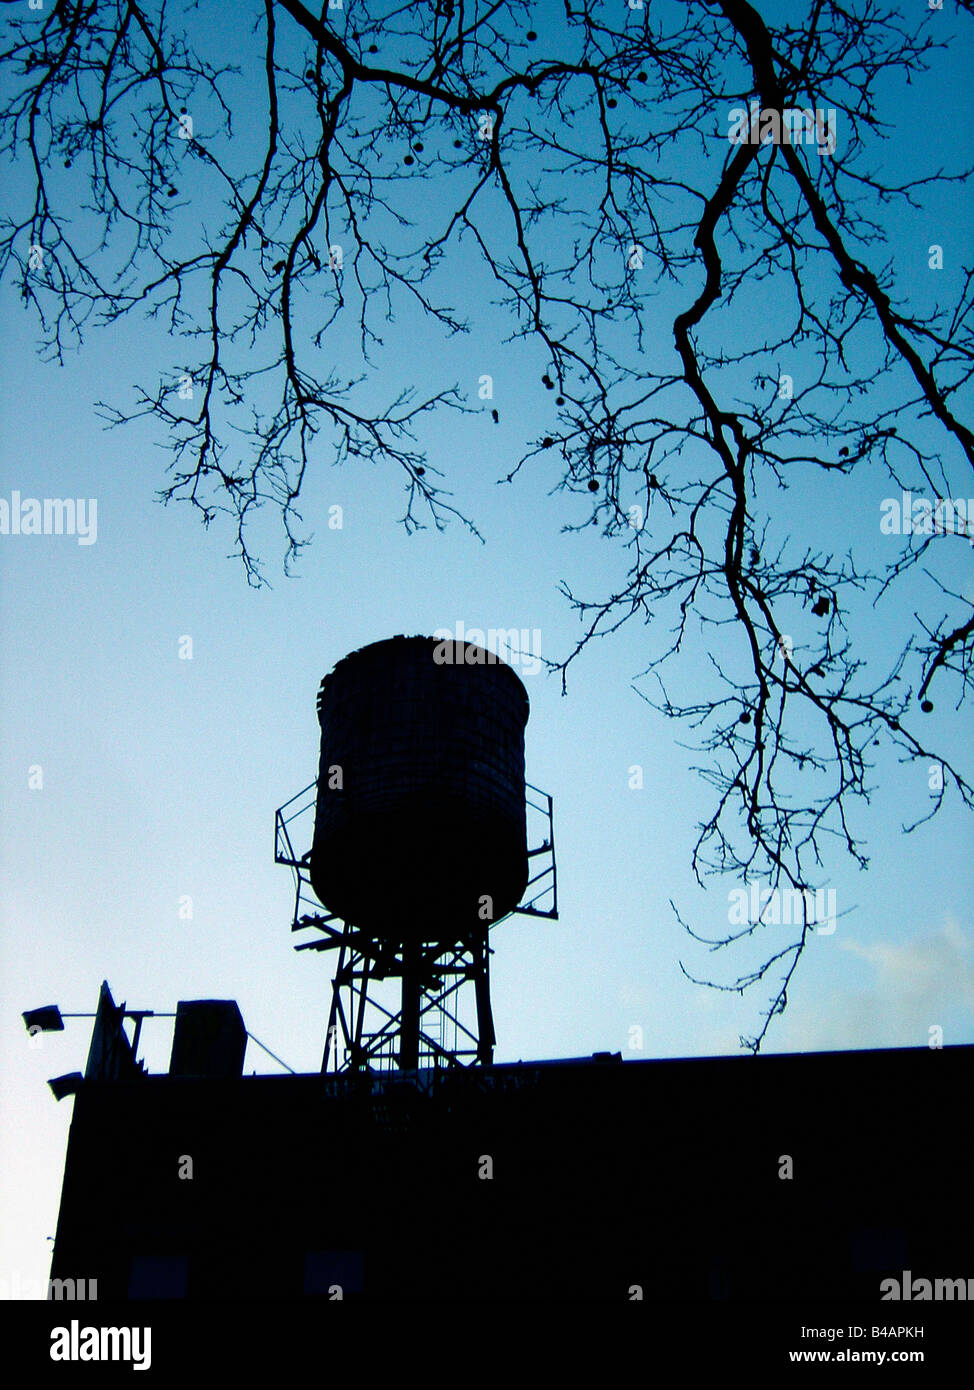 Urban Scene of a Water Tower and Bare Tree Silhouetted Against a Dusk Sky Copy Space Stock Photo